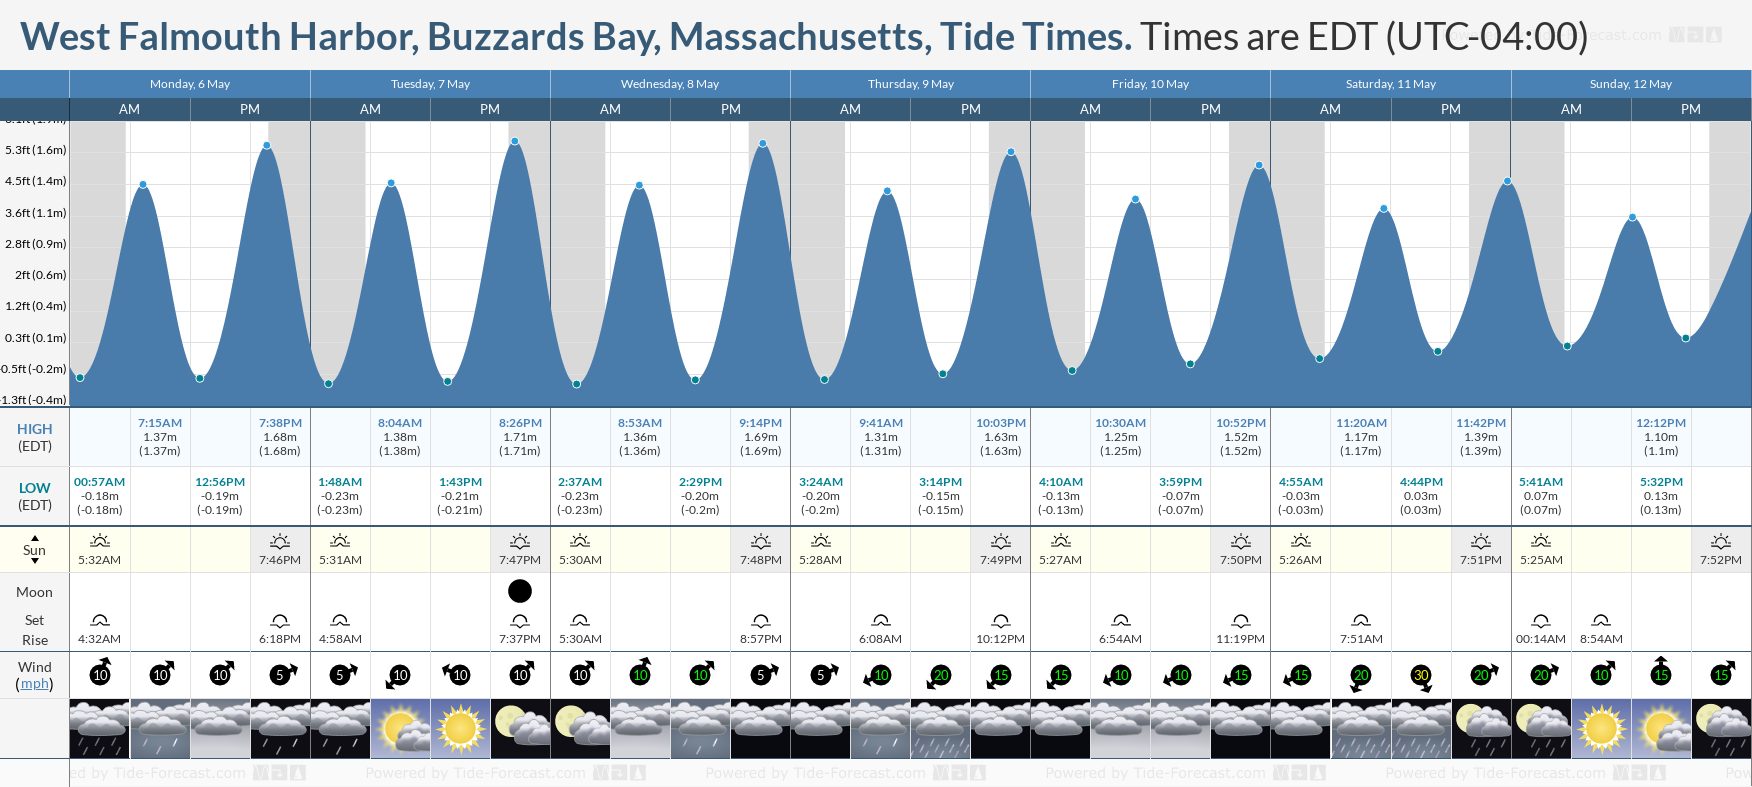 West Falmouth Harbor, Buzzards Bay, Massachusetts Tide Chart including high and low tide tide times for the next 7 days